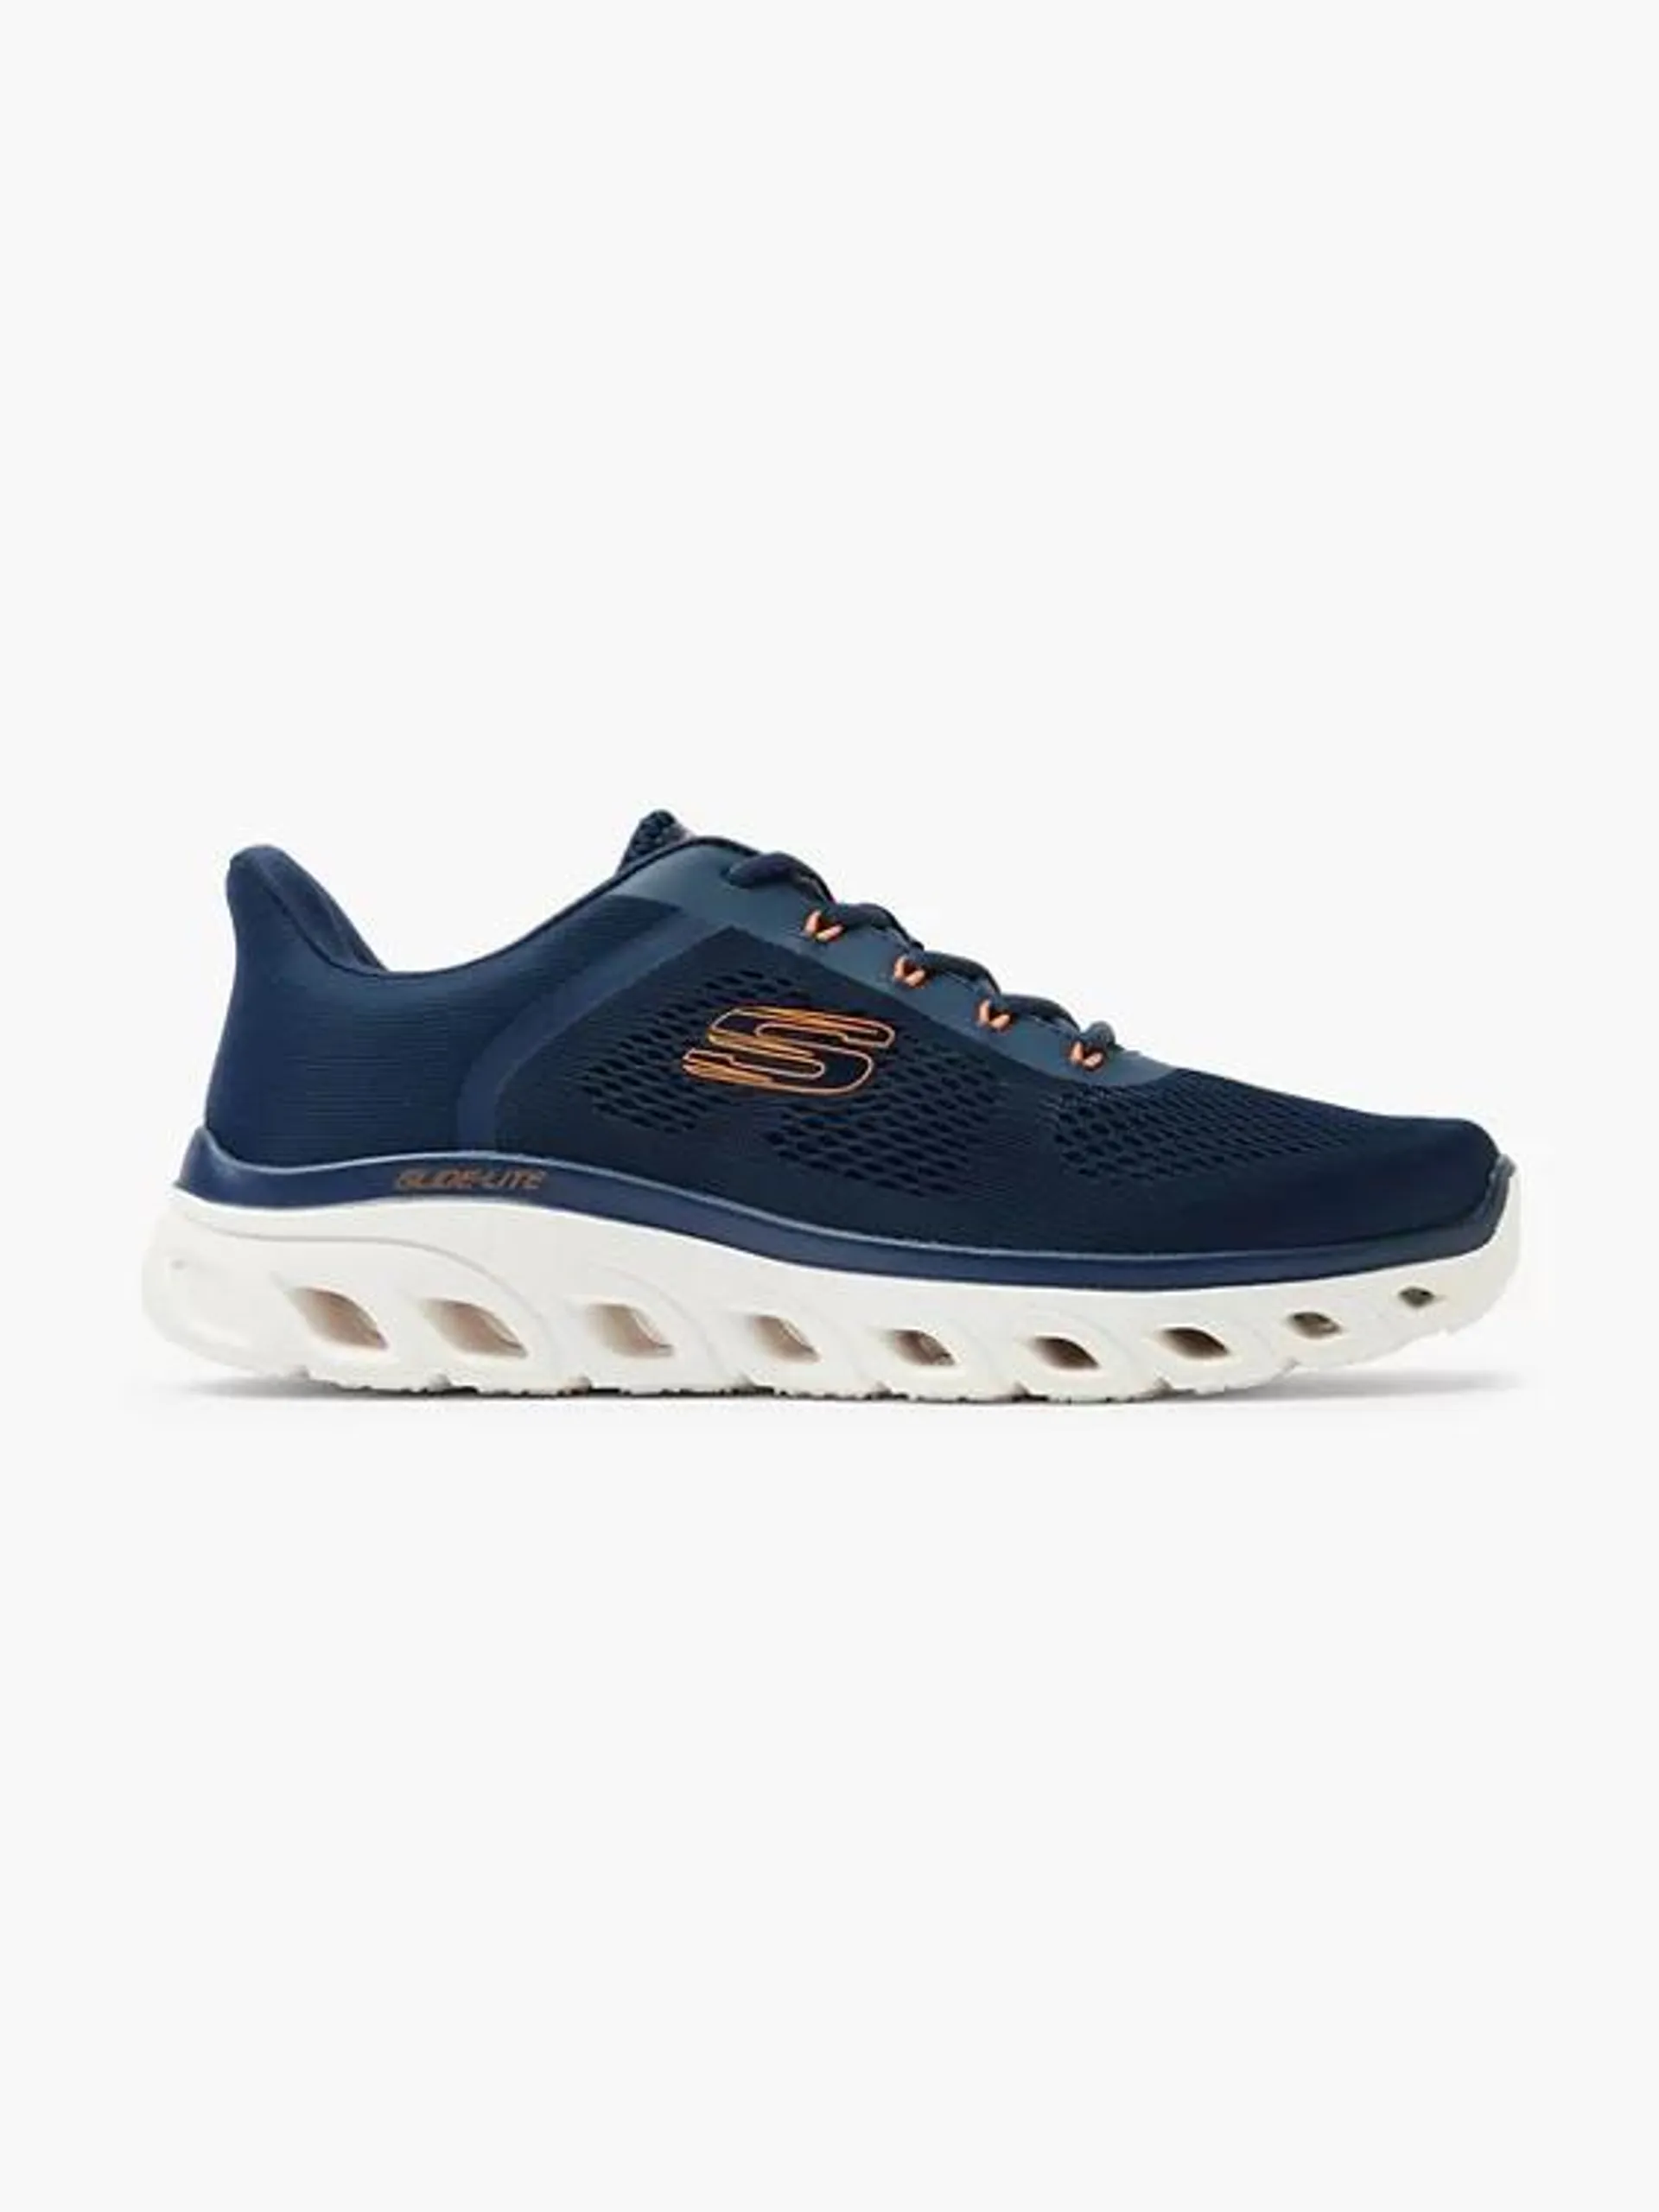 Skechers Navy/Orange Air Coded Memory Foam Lace-up Trainer